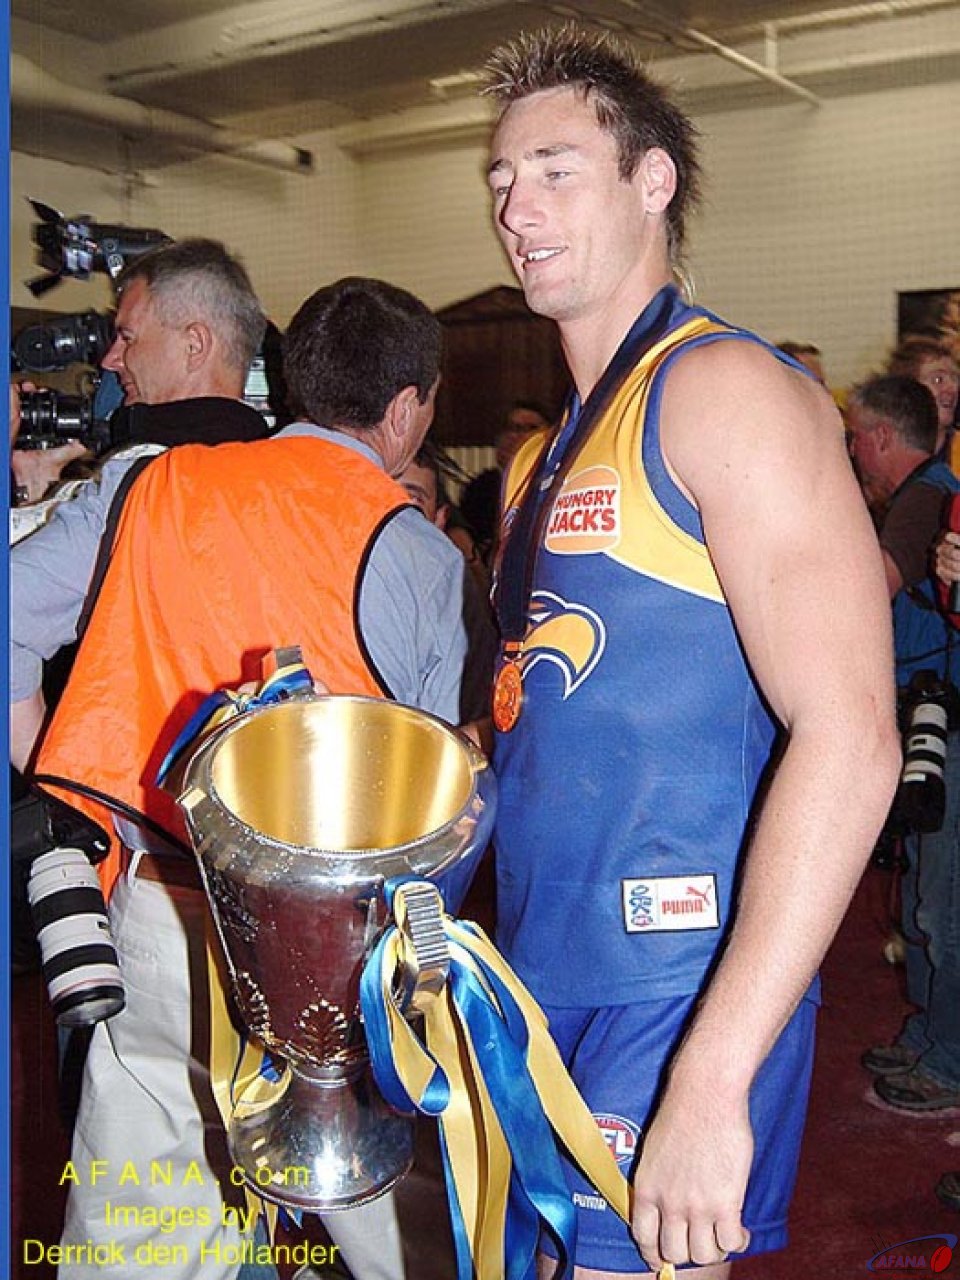 [b]With exhaultation comes exhaustion after the 2006 AFL Grand Final[/b]